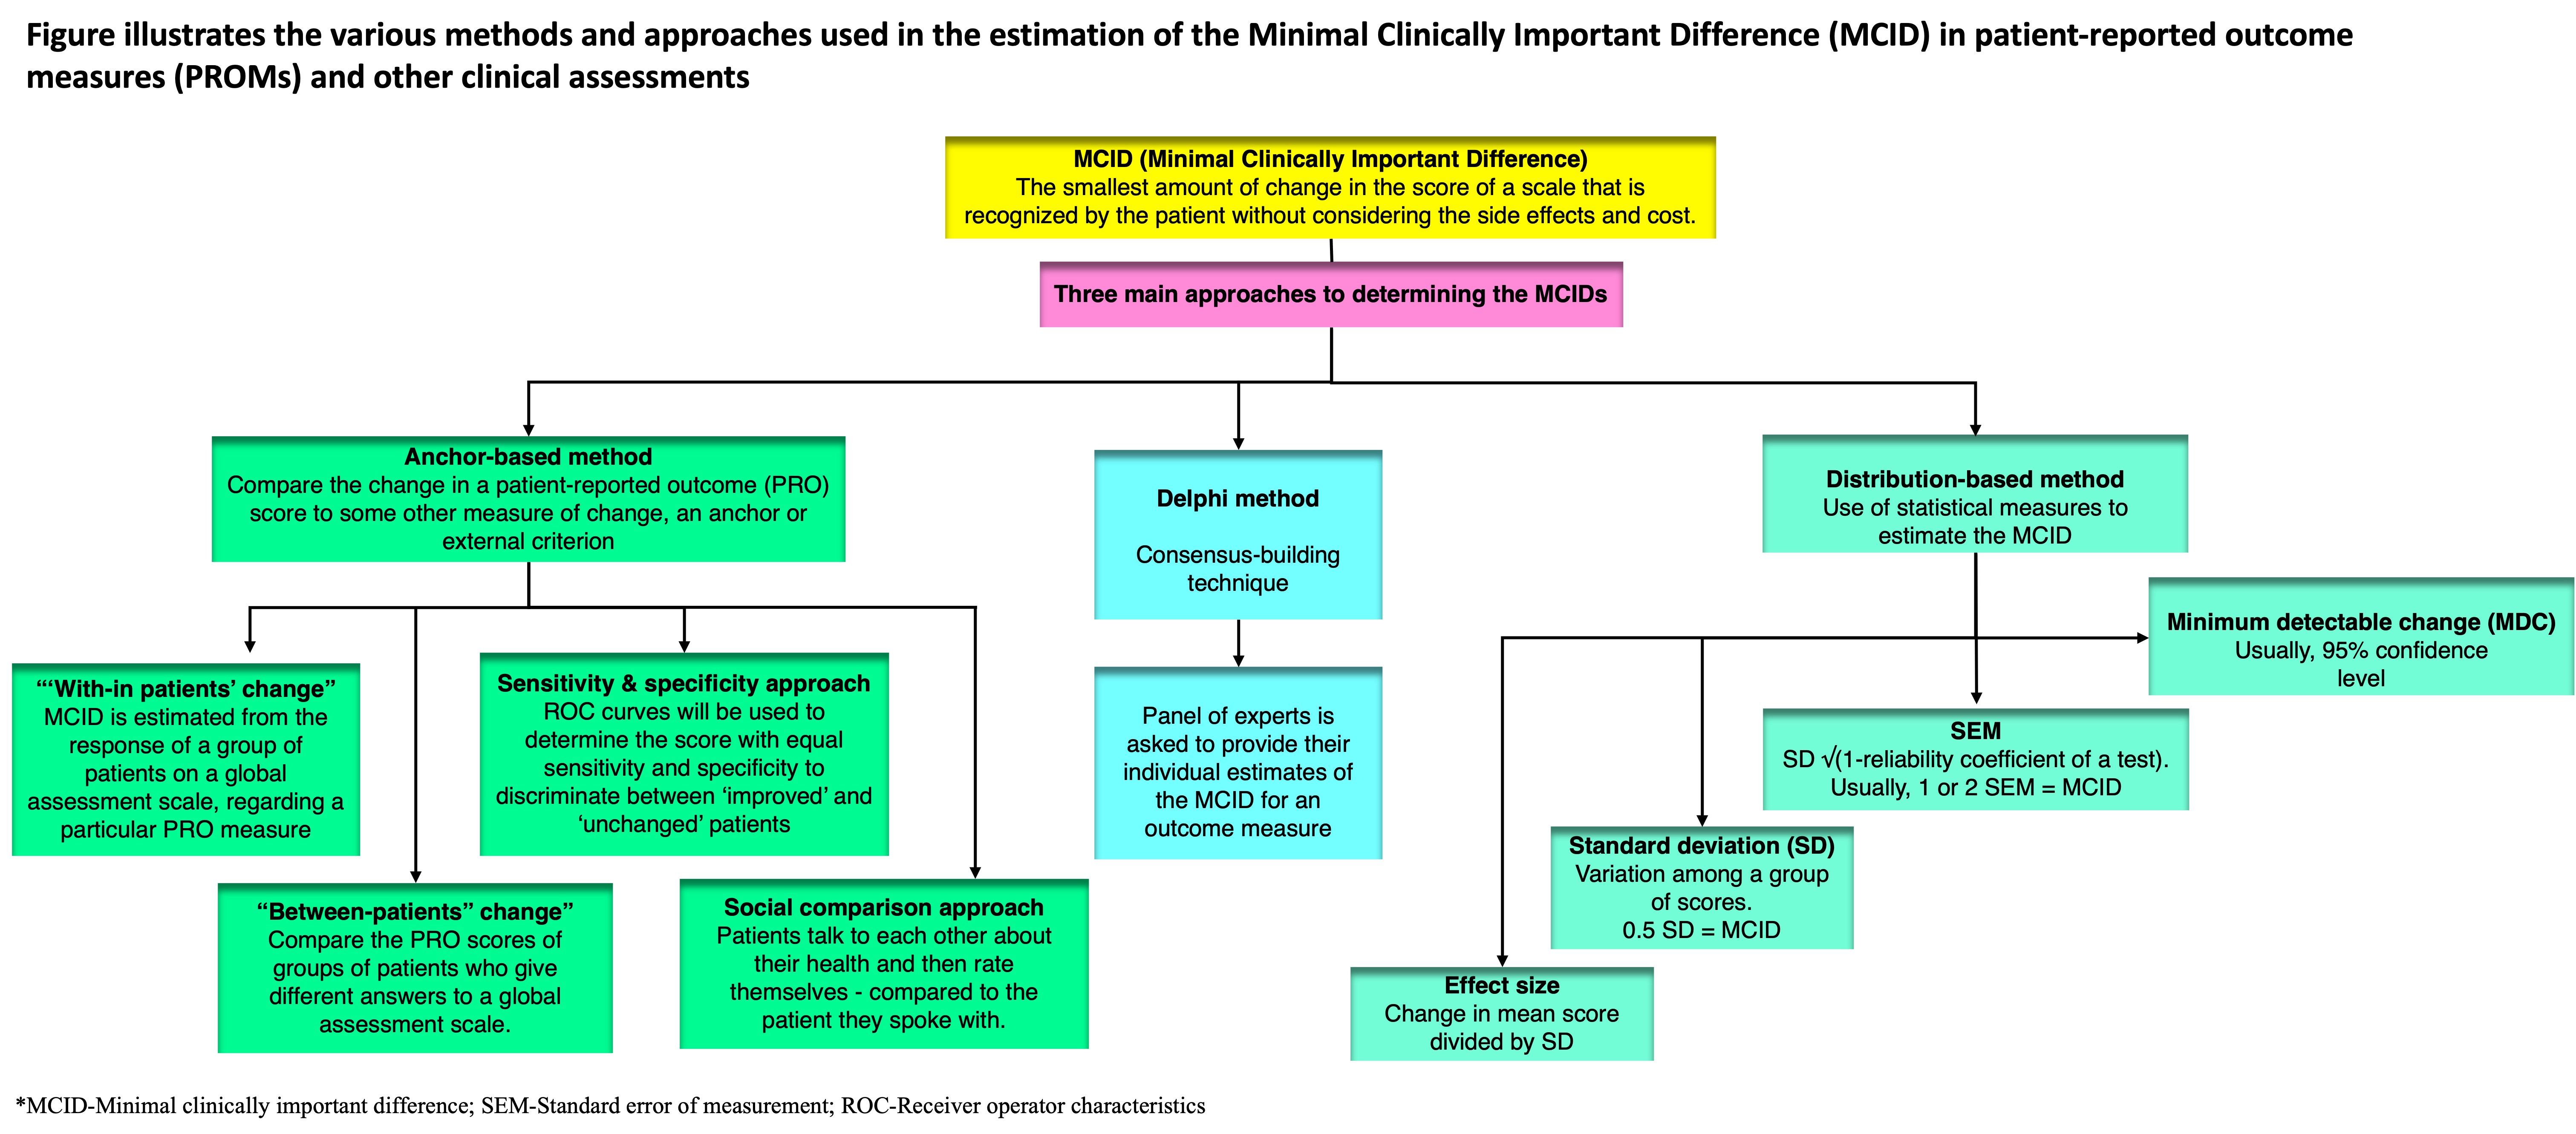 Figure shows the various approaches used to estimate MCID 